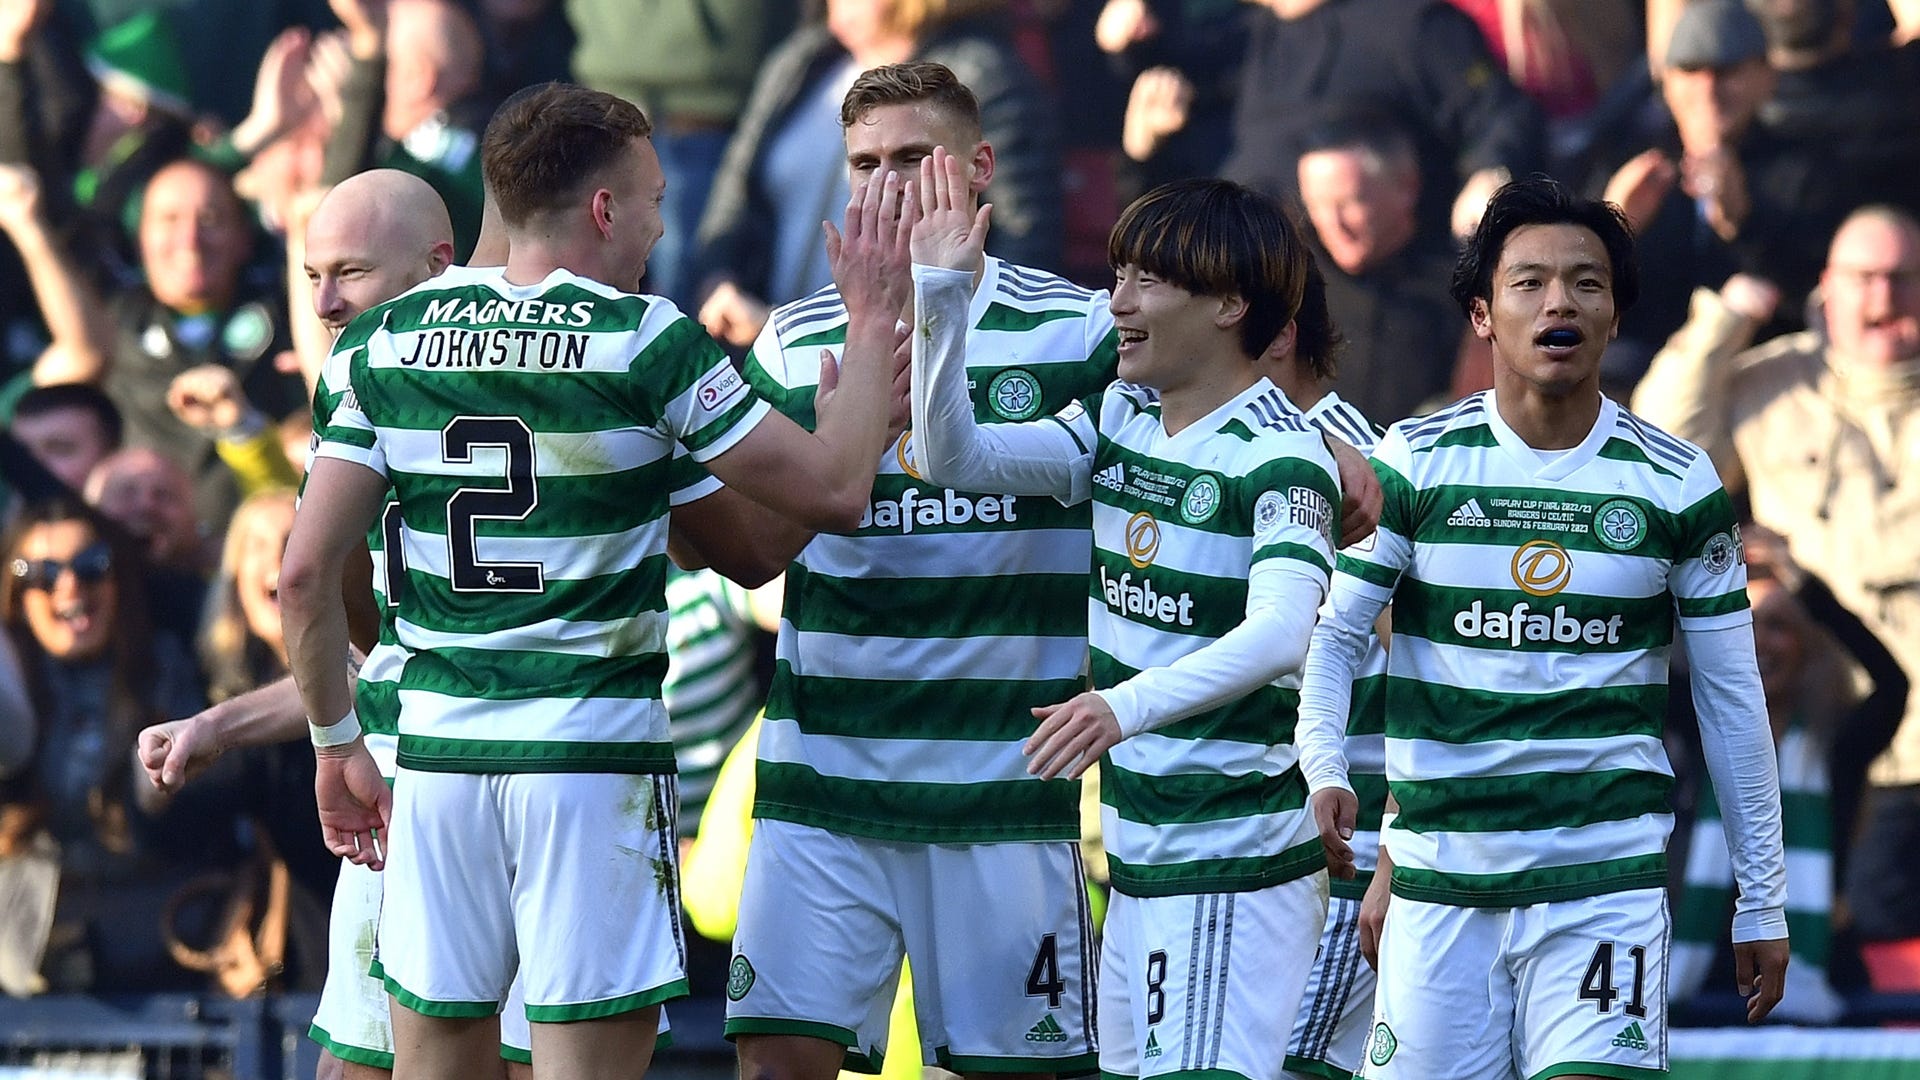 Celtic vs Hearts Live stream, TV channel, kick-off time and where to watch Goal